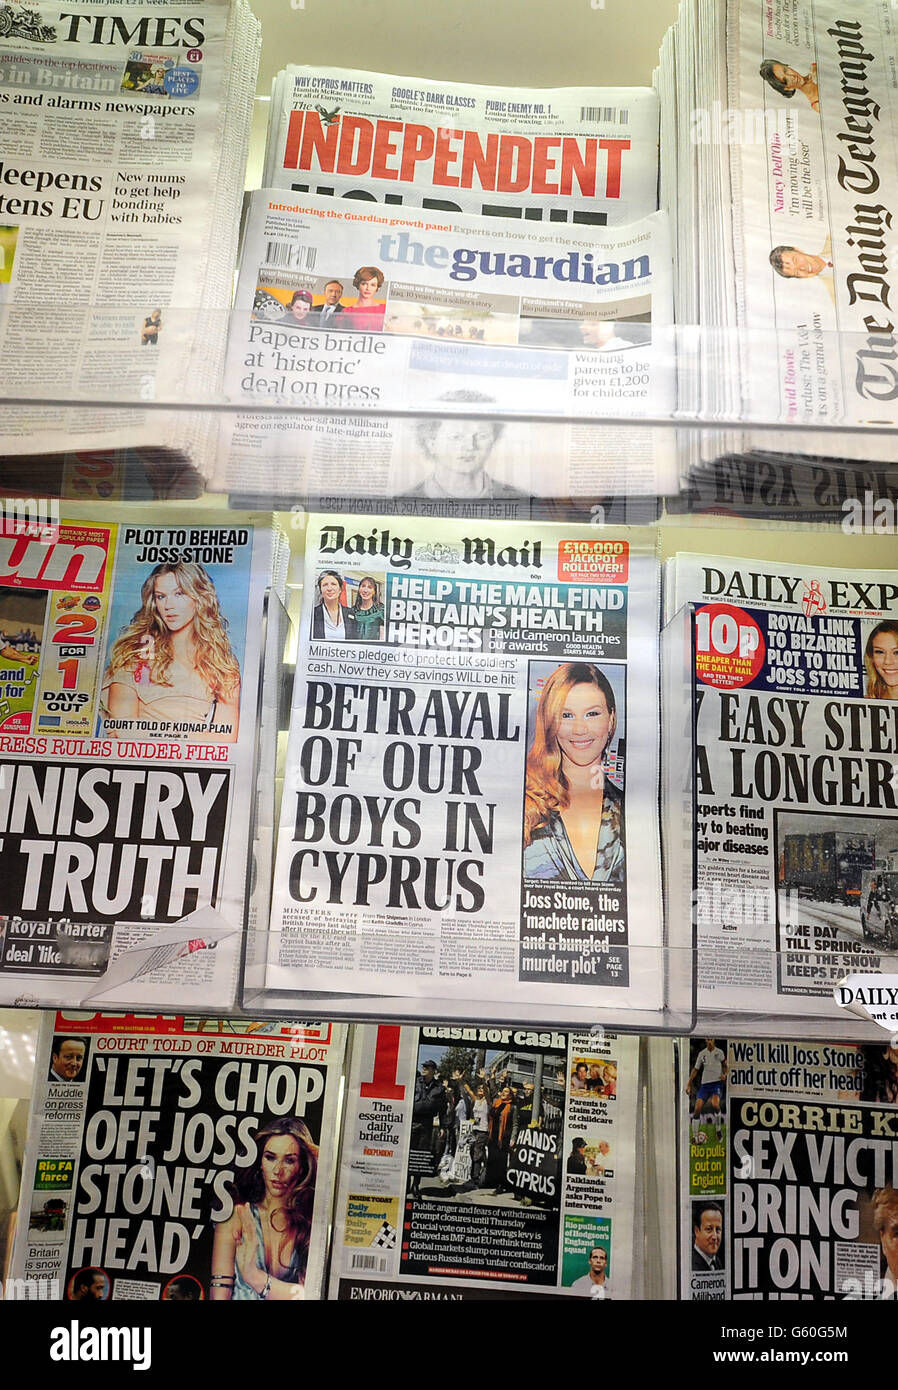 General view of newspapers on sale the morning after the three political parties agreed on a Royal Charter that would safeguard investigative journalism and freedom while protecting the victims of press intrusion, in line with the recommendations of Lord Justice Leveson that was met however with outrage and scepticism across much of Fleet Street today . Stock Photo